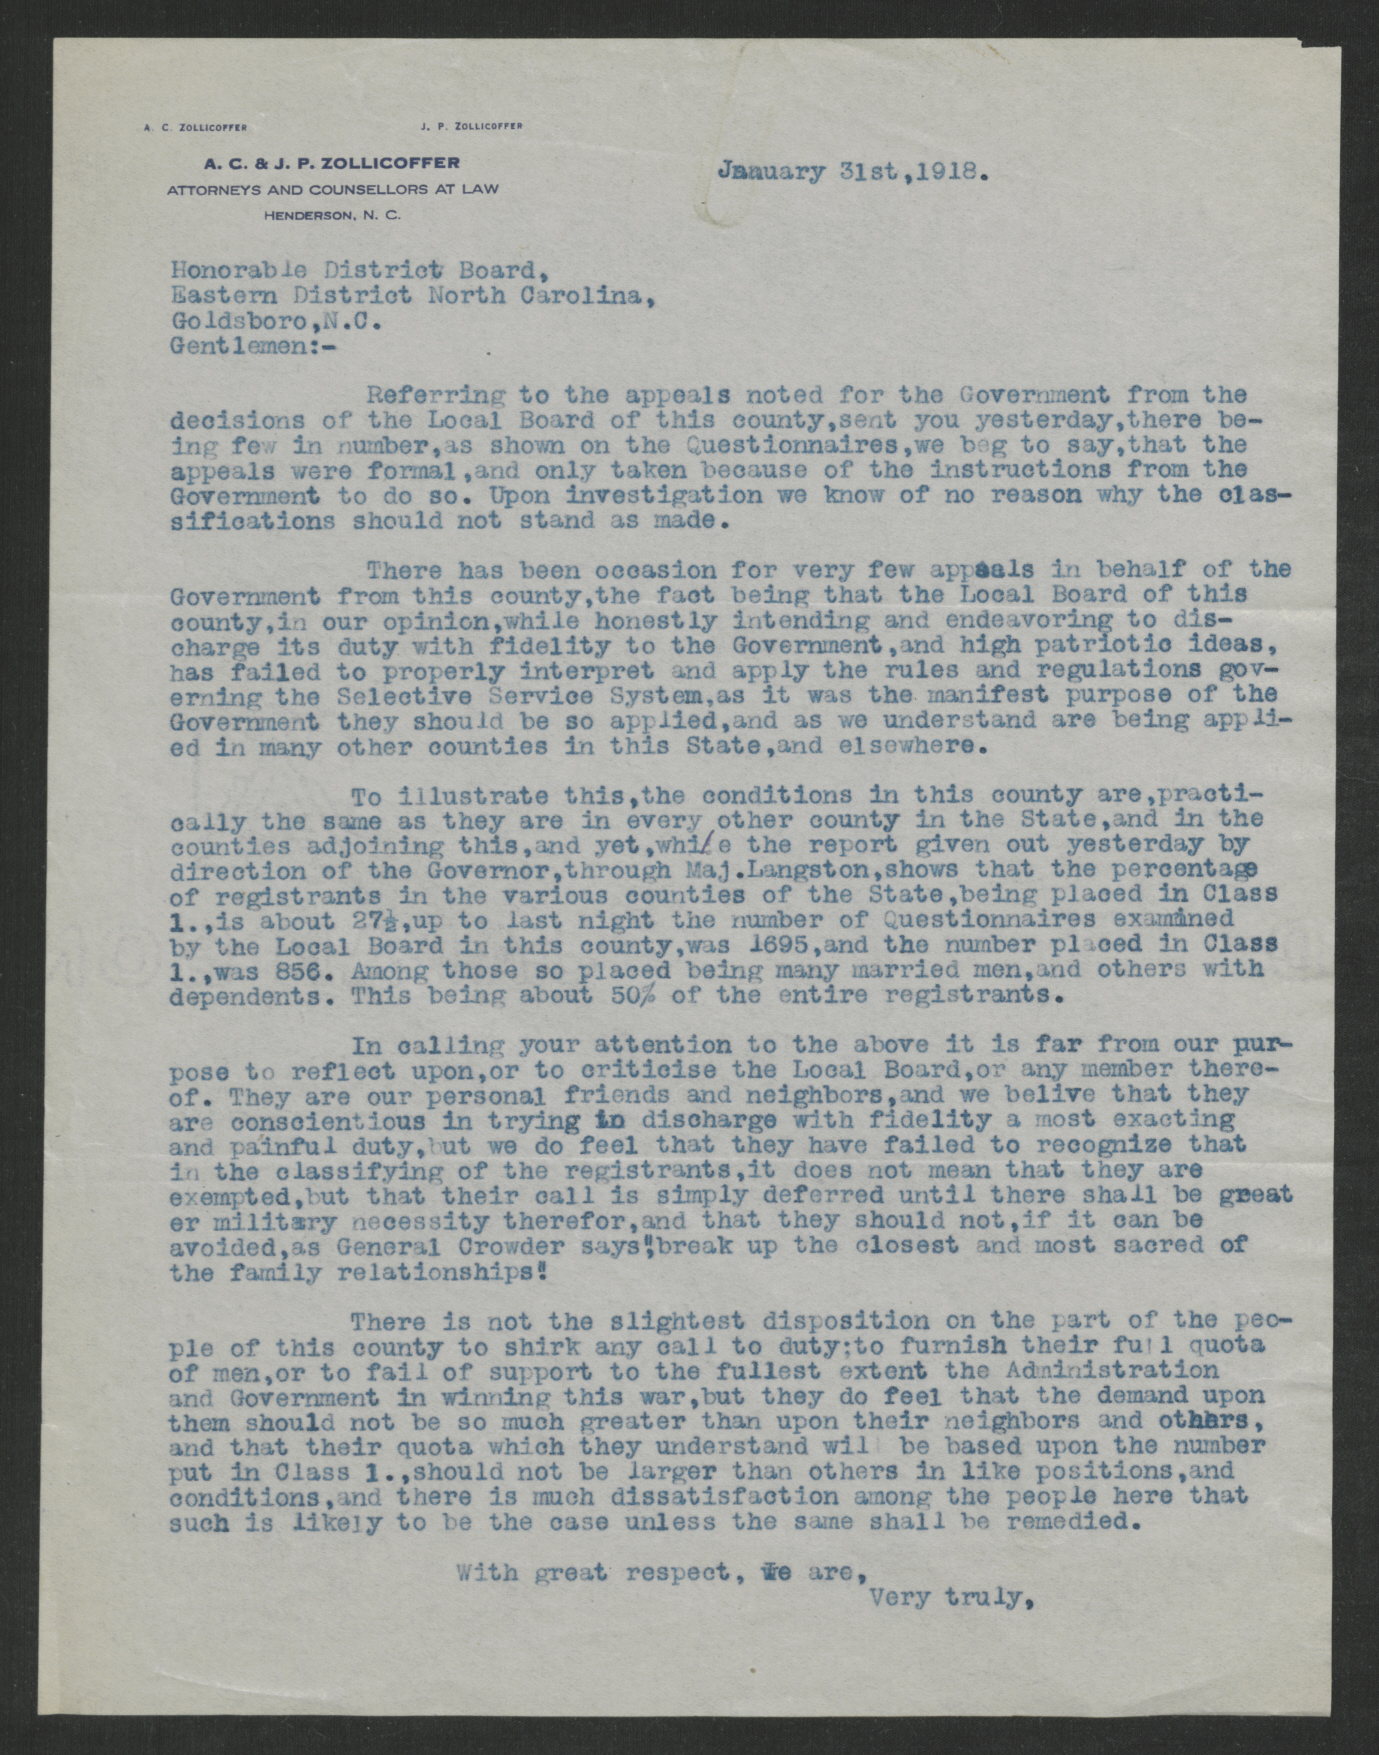 Letter from an Unknown Author to the Eastern District Exemption Board, January 31, 1918